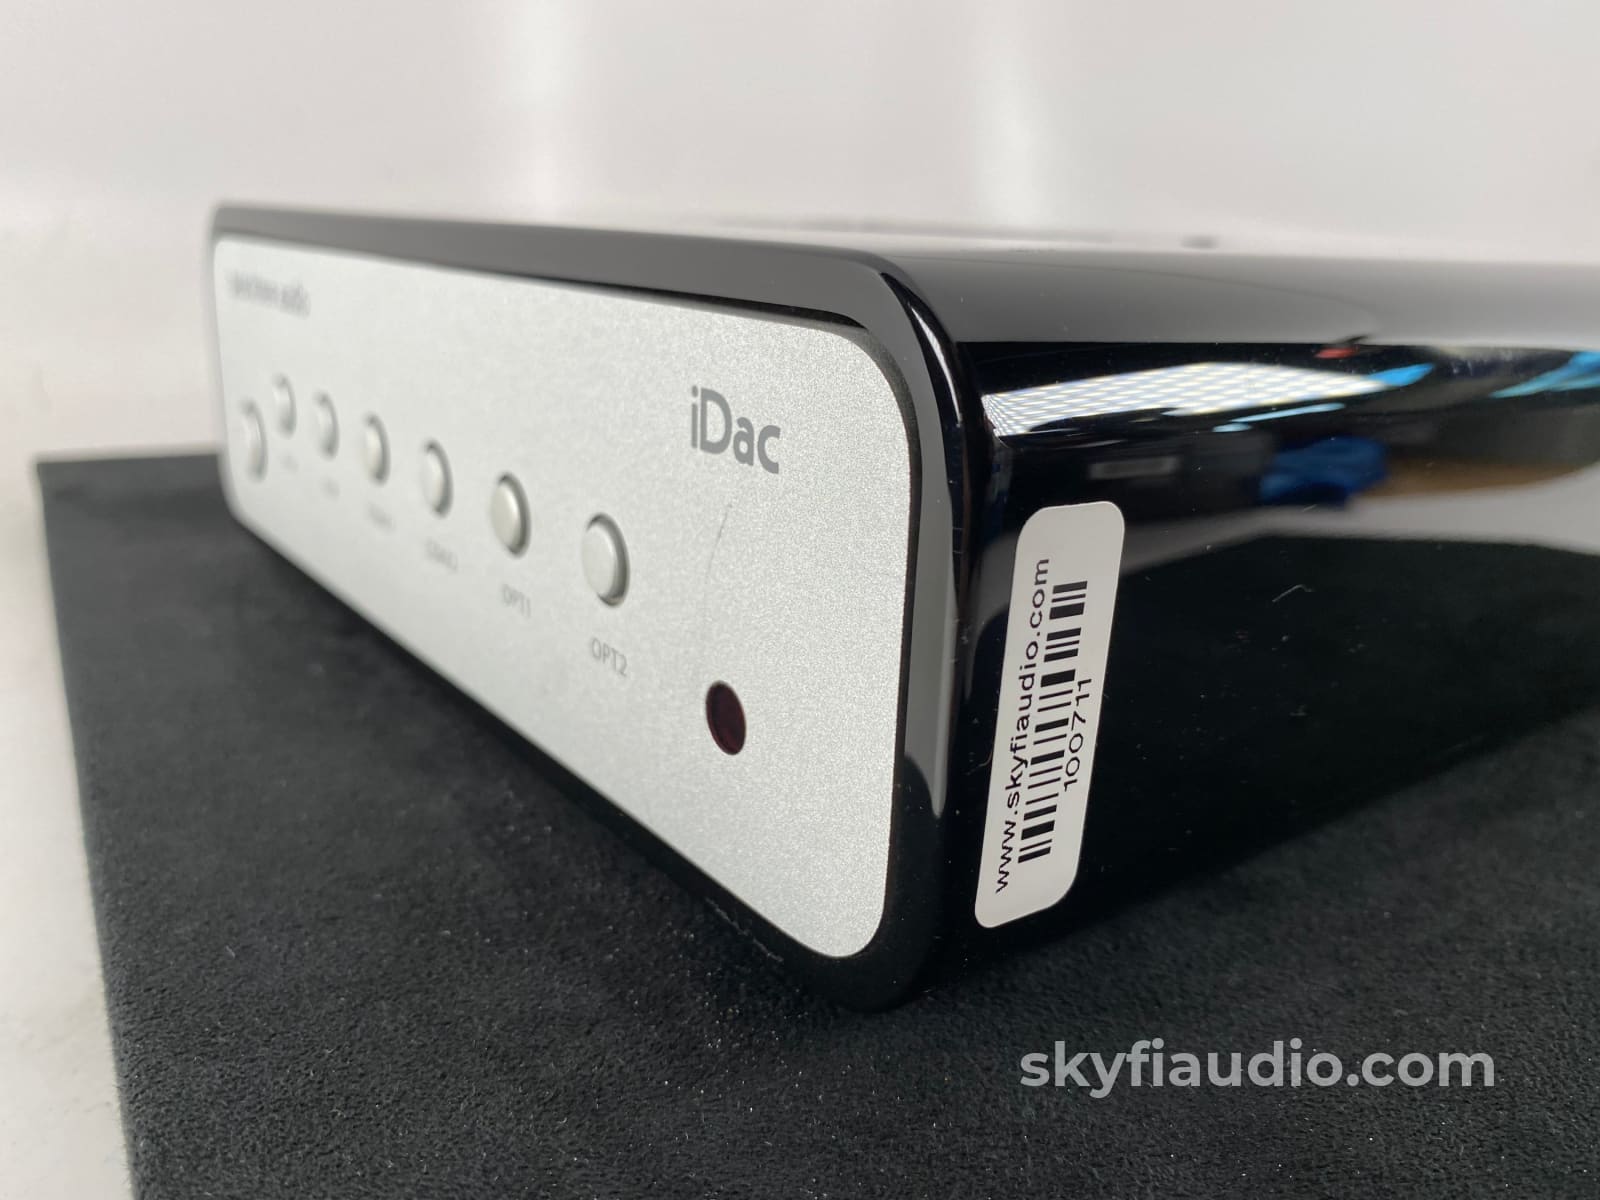 Peachtree Audio Idac Stereophile Class A Rated Ess Sabre Dac Cd + Digital